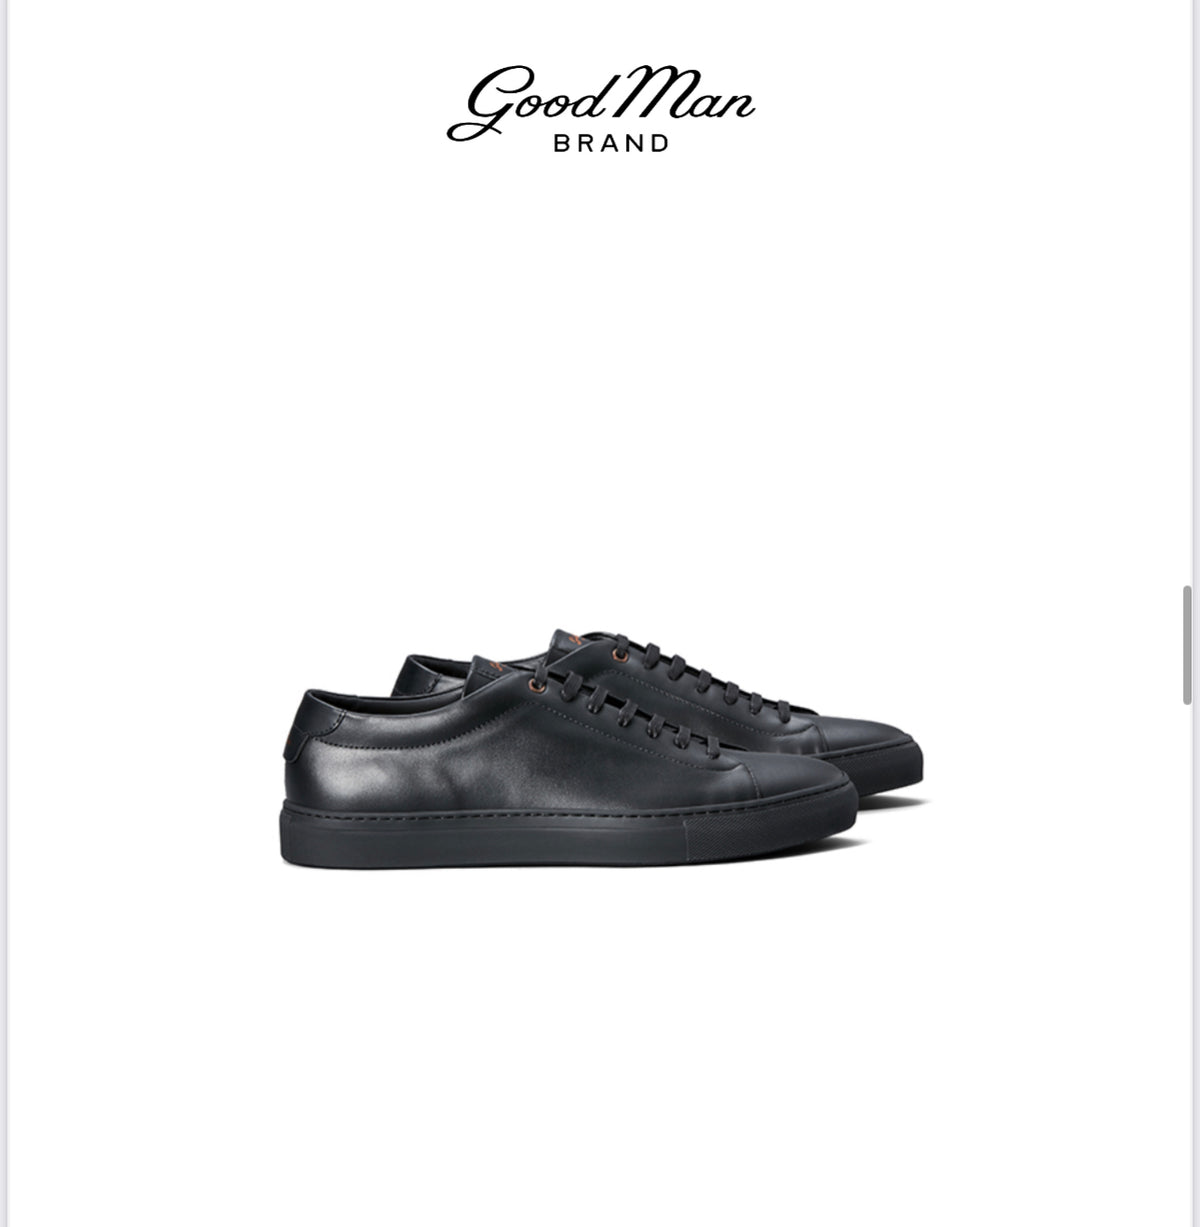 The Good Man Brand Shoes